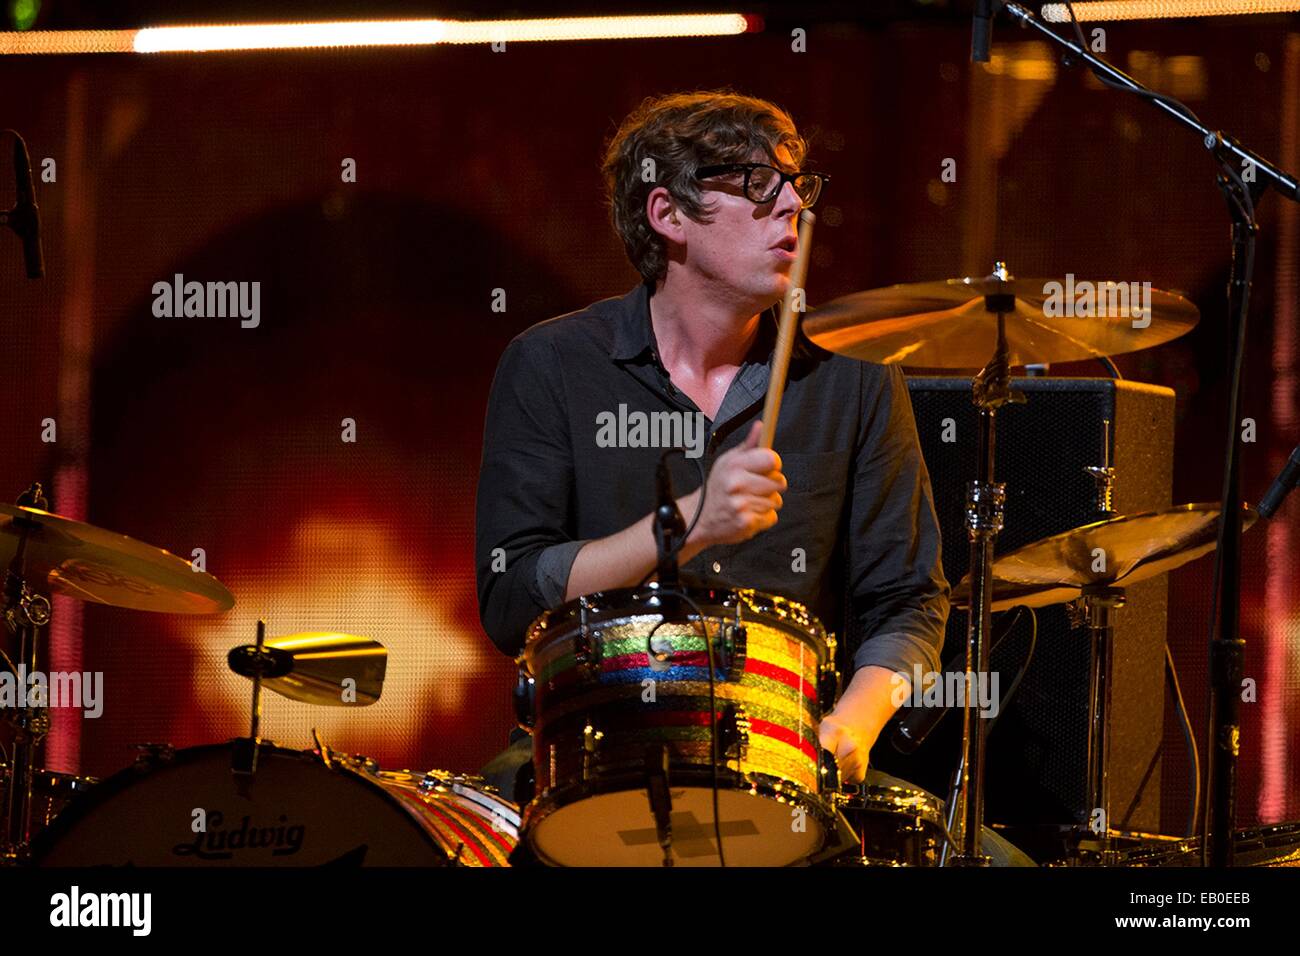 Patrick Carney, drummer of the band The Black Keys, performs during the Concert for Valor November 11, 2014 in Washington, D.C. Stock Photo